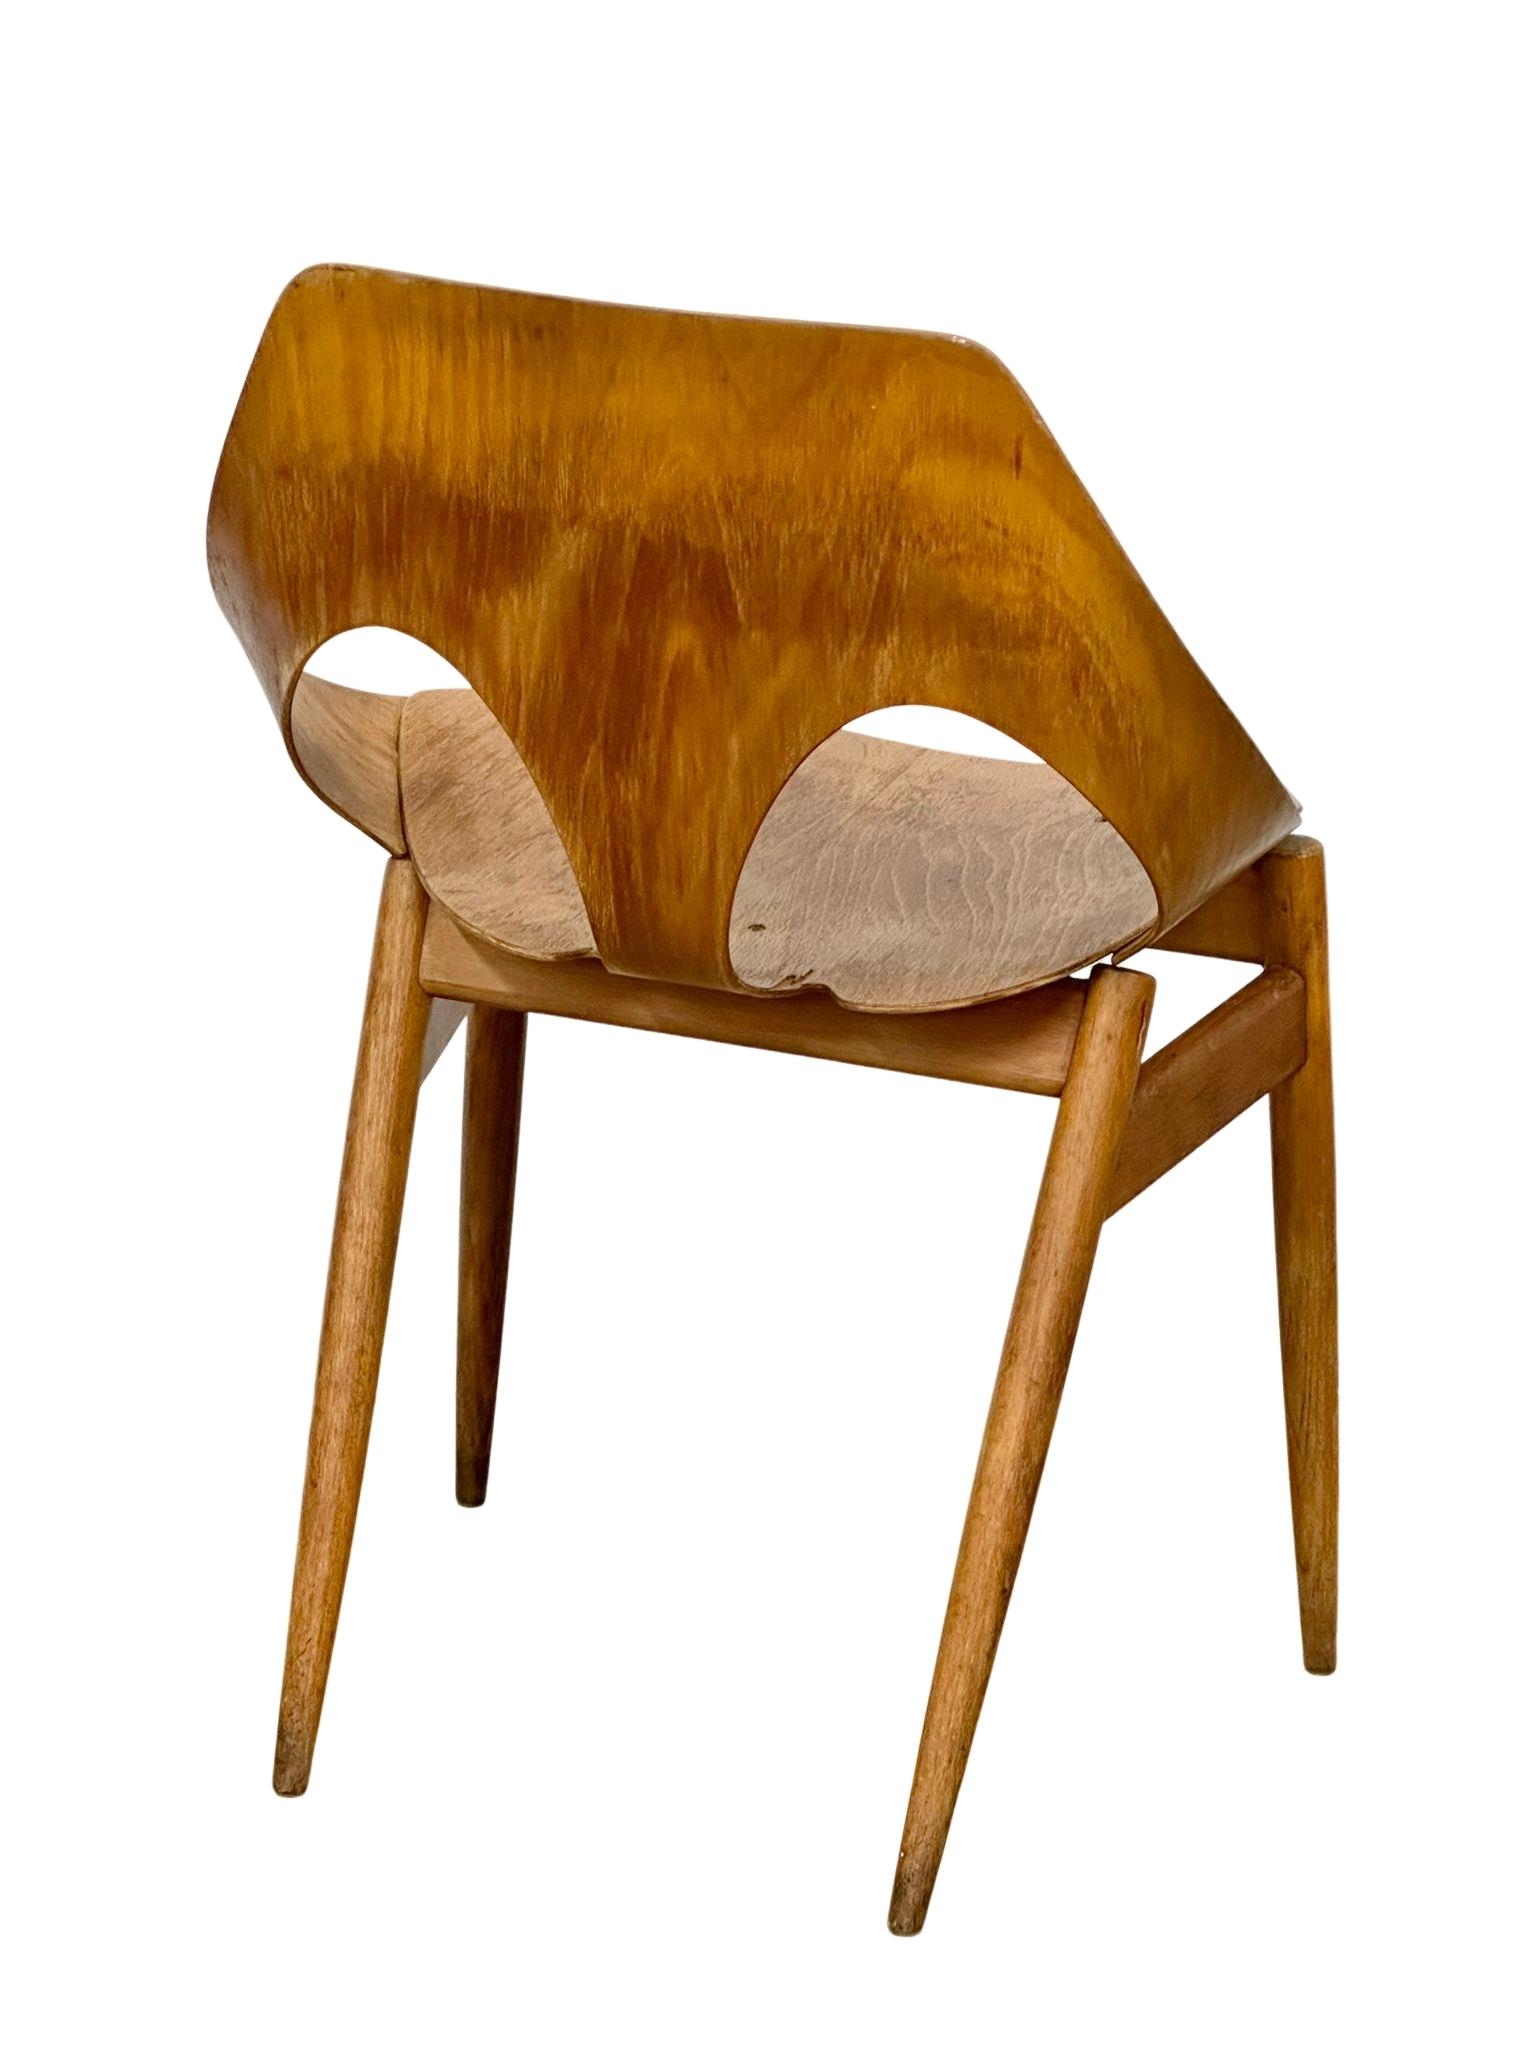 A rare set of 4 "Jason" chairs designed by Carl Jacobs for Kandya. - Image 3 of 9